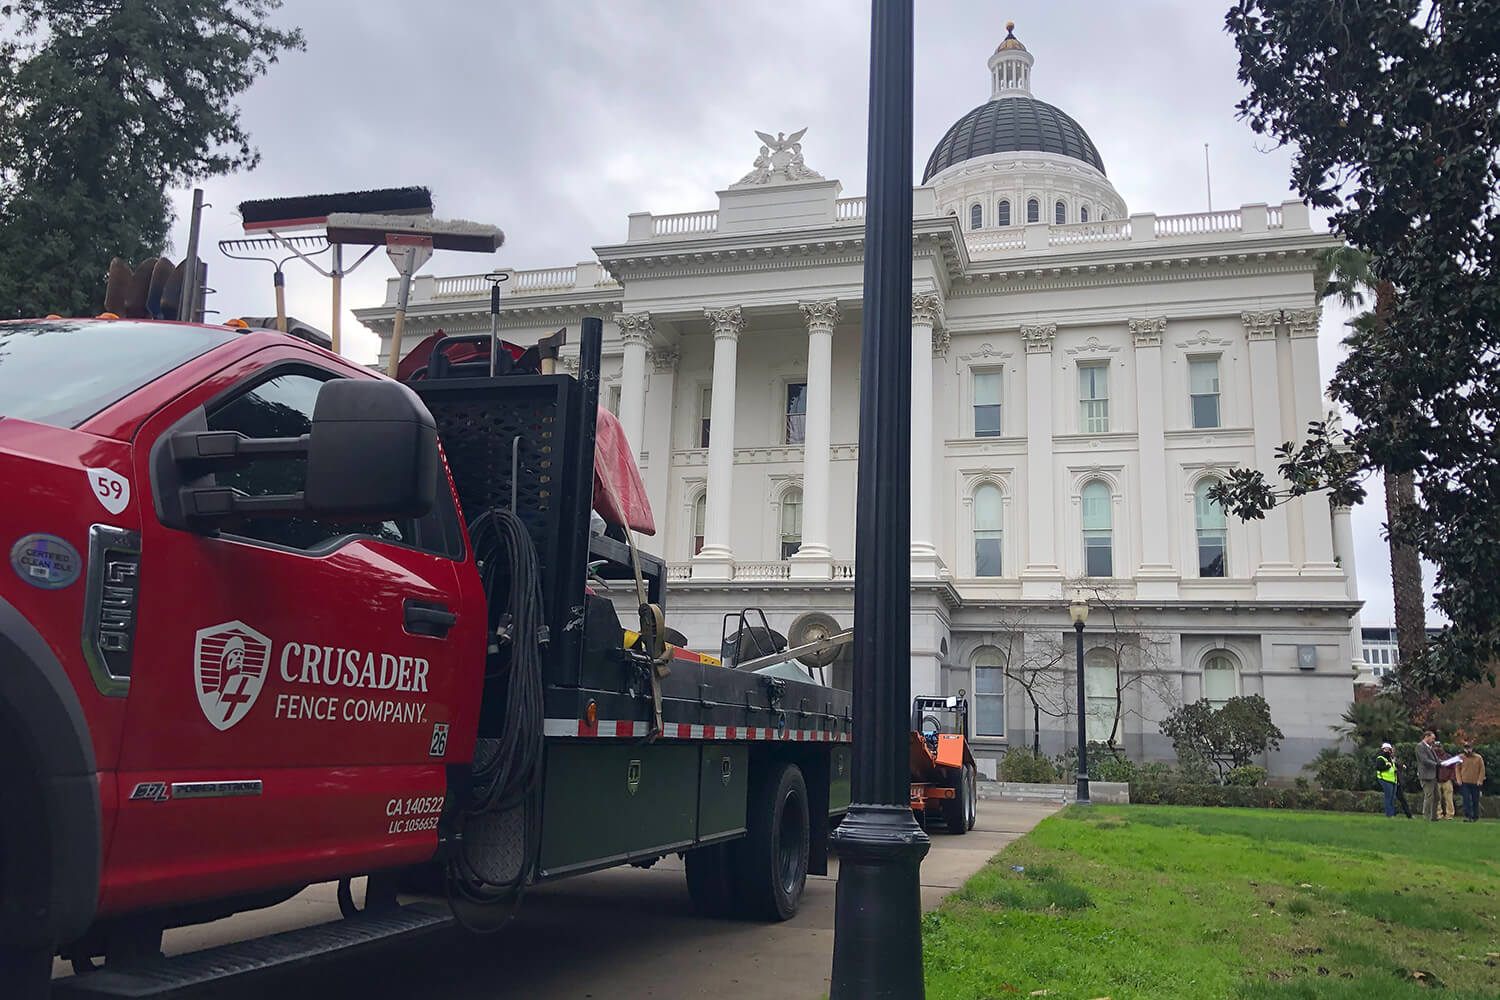 Crusader truck in front of capitol building